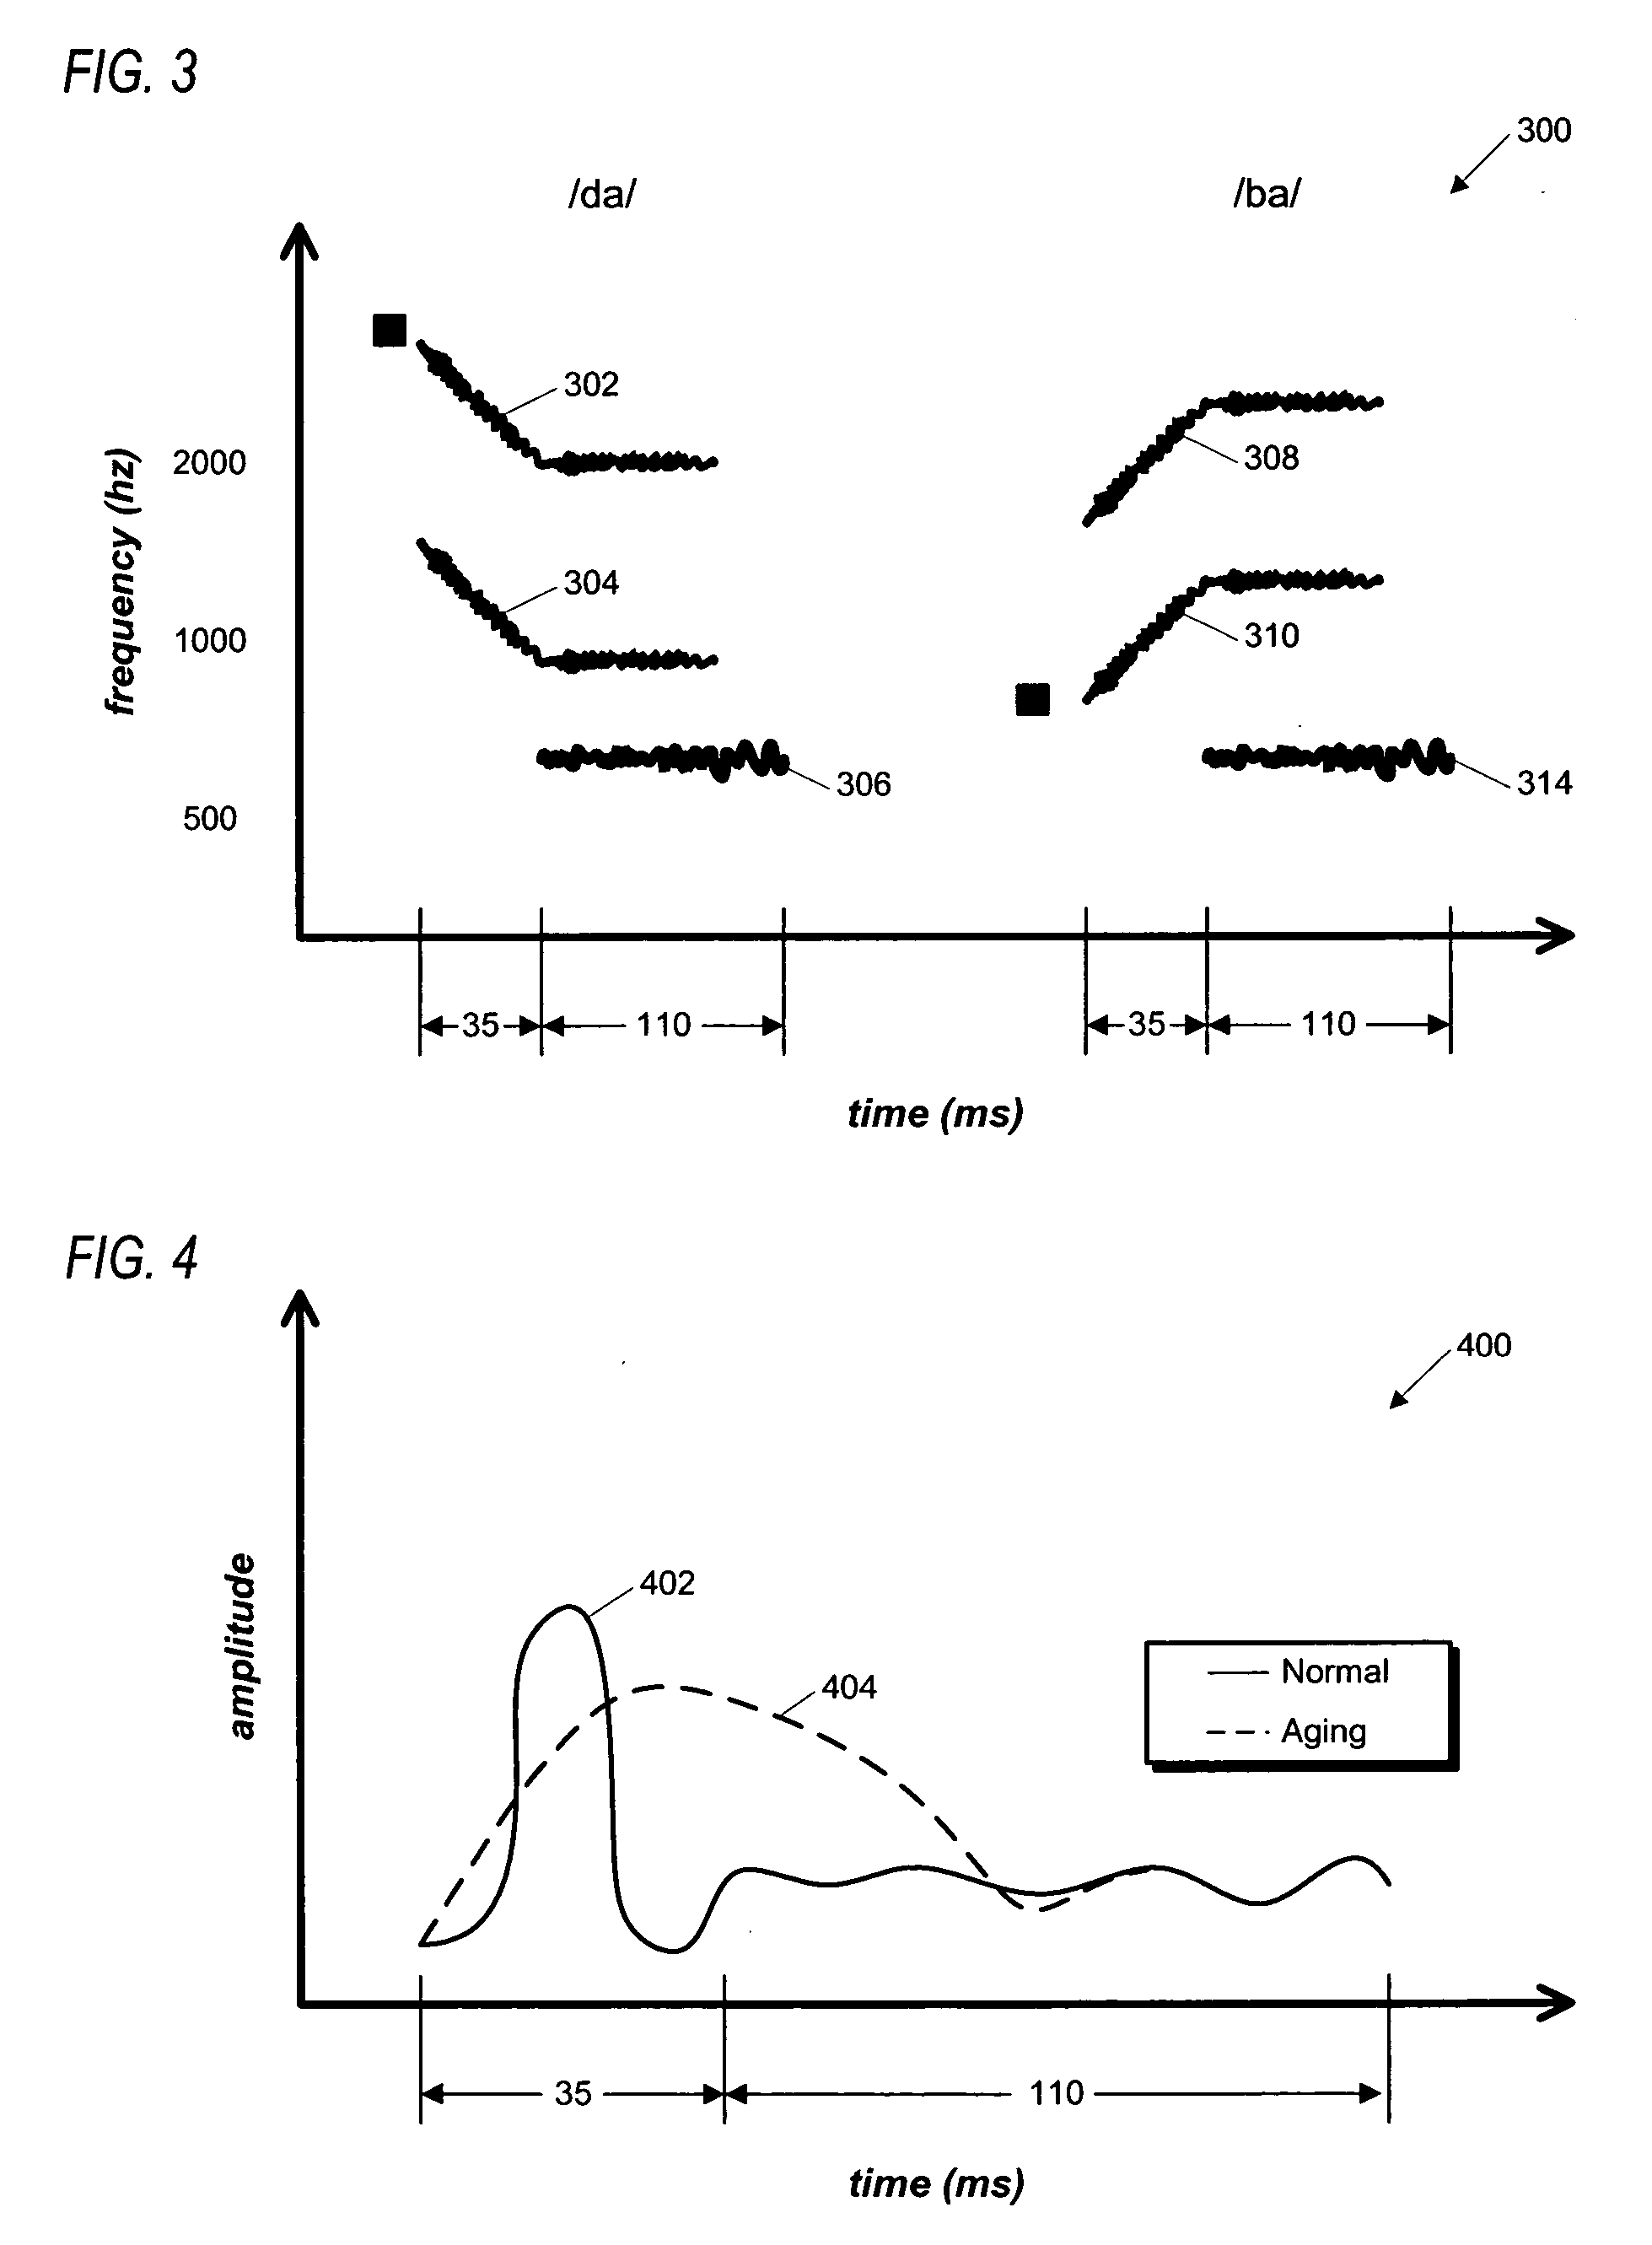 Method for enhancing memory and cognition in aging adults